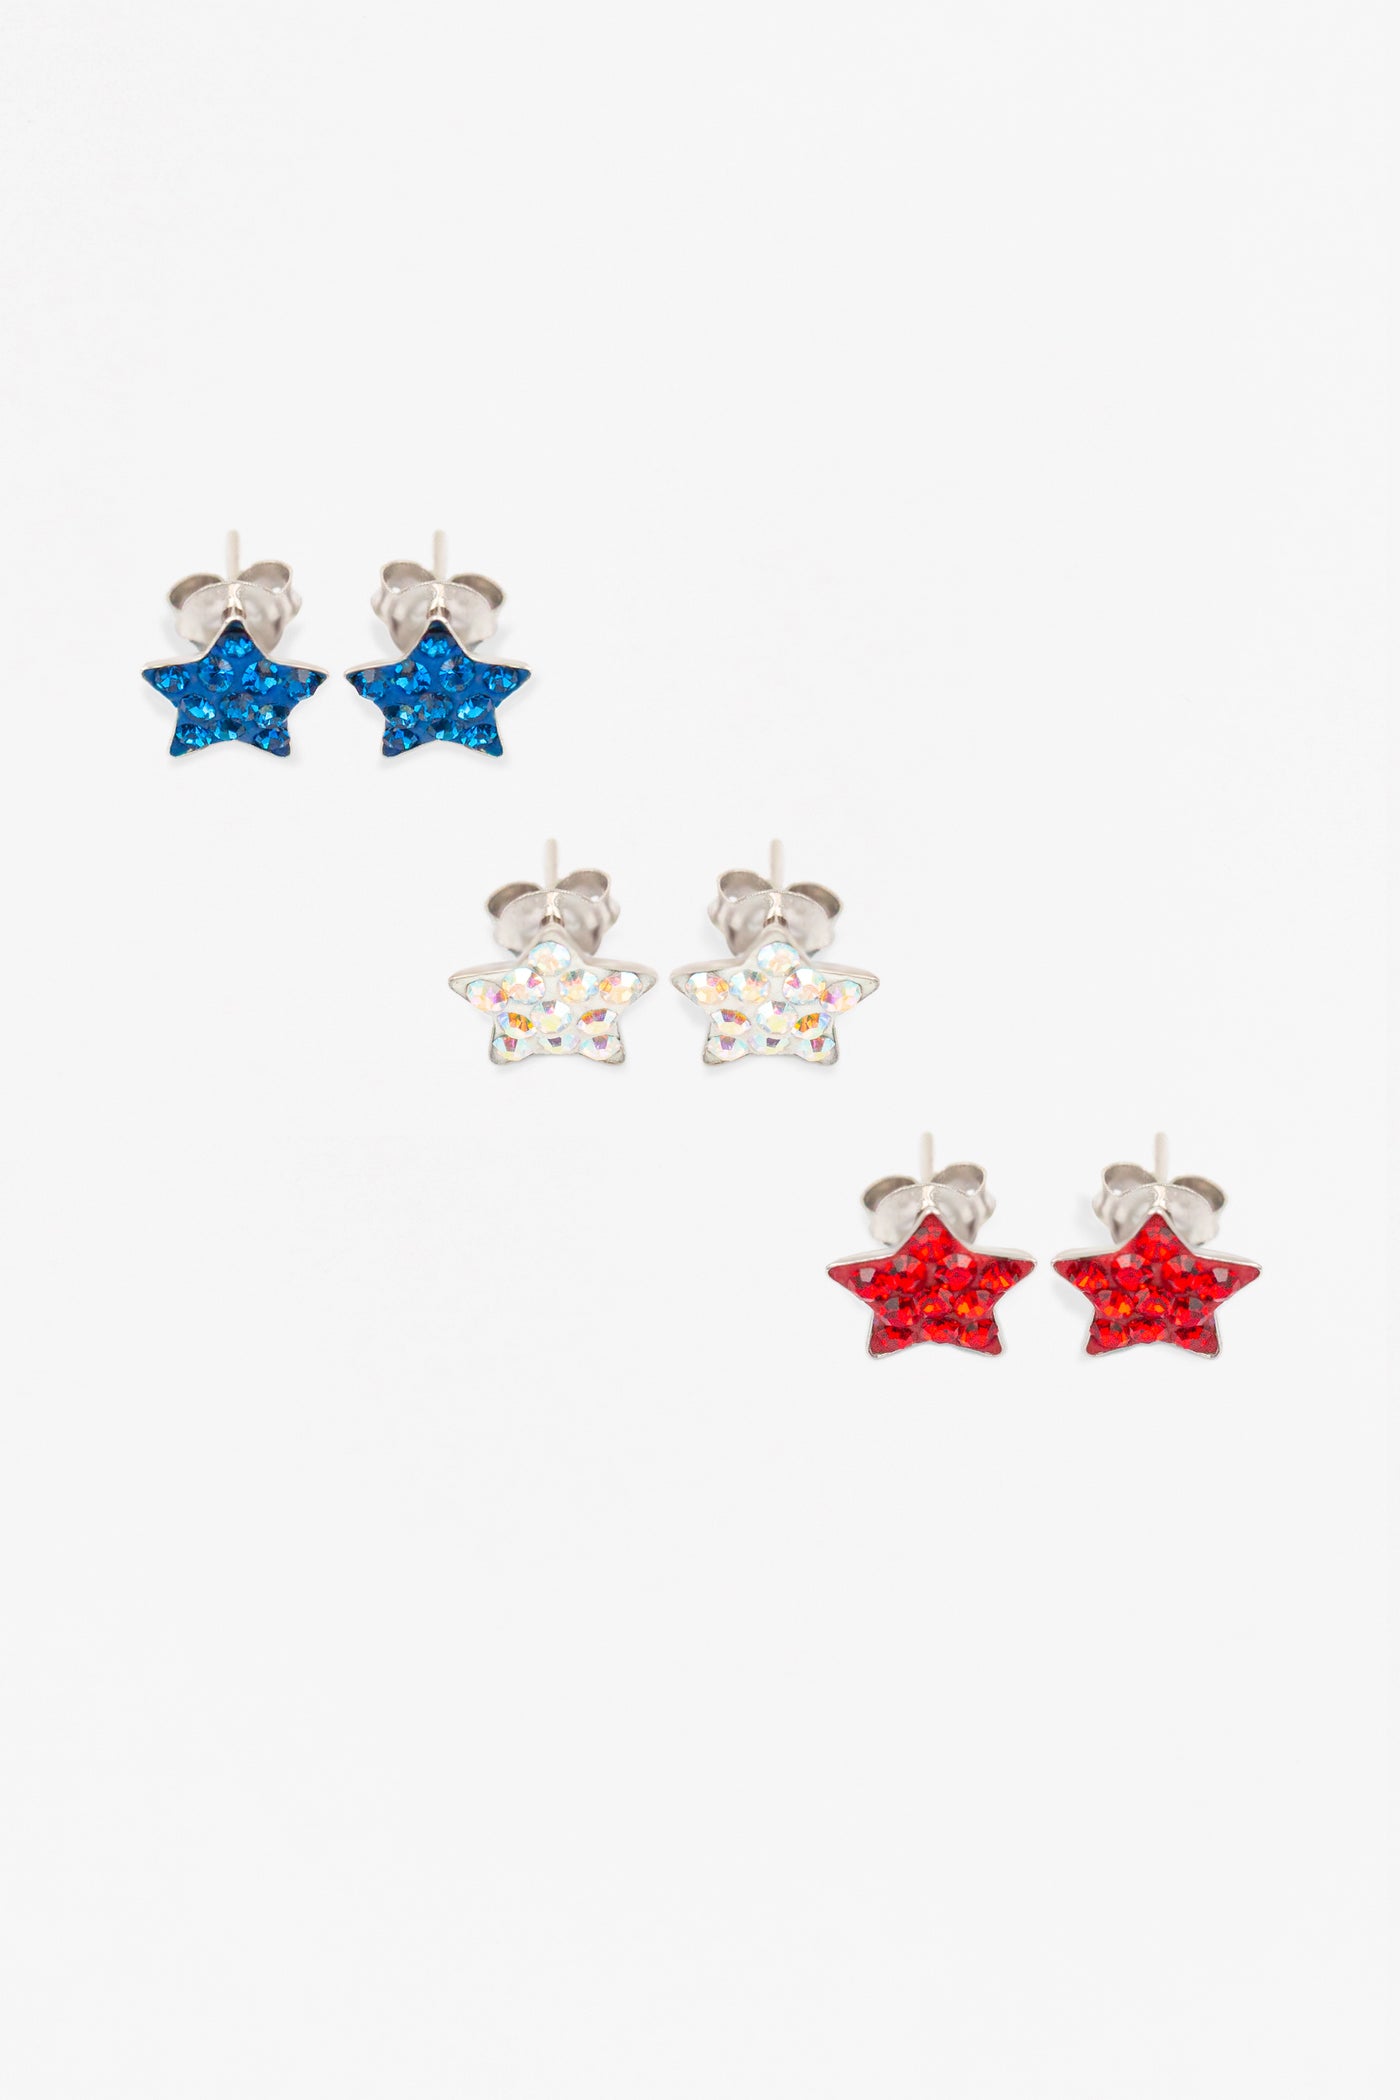 Red White and Blue Star Stud Sterling Silver Earrings Three Piece Set